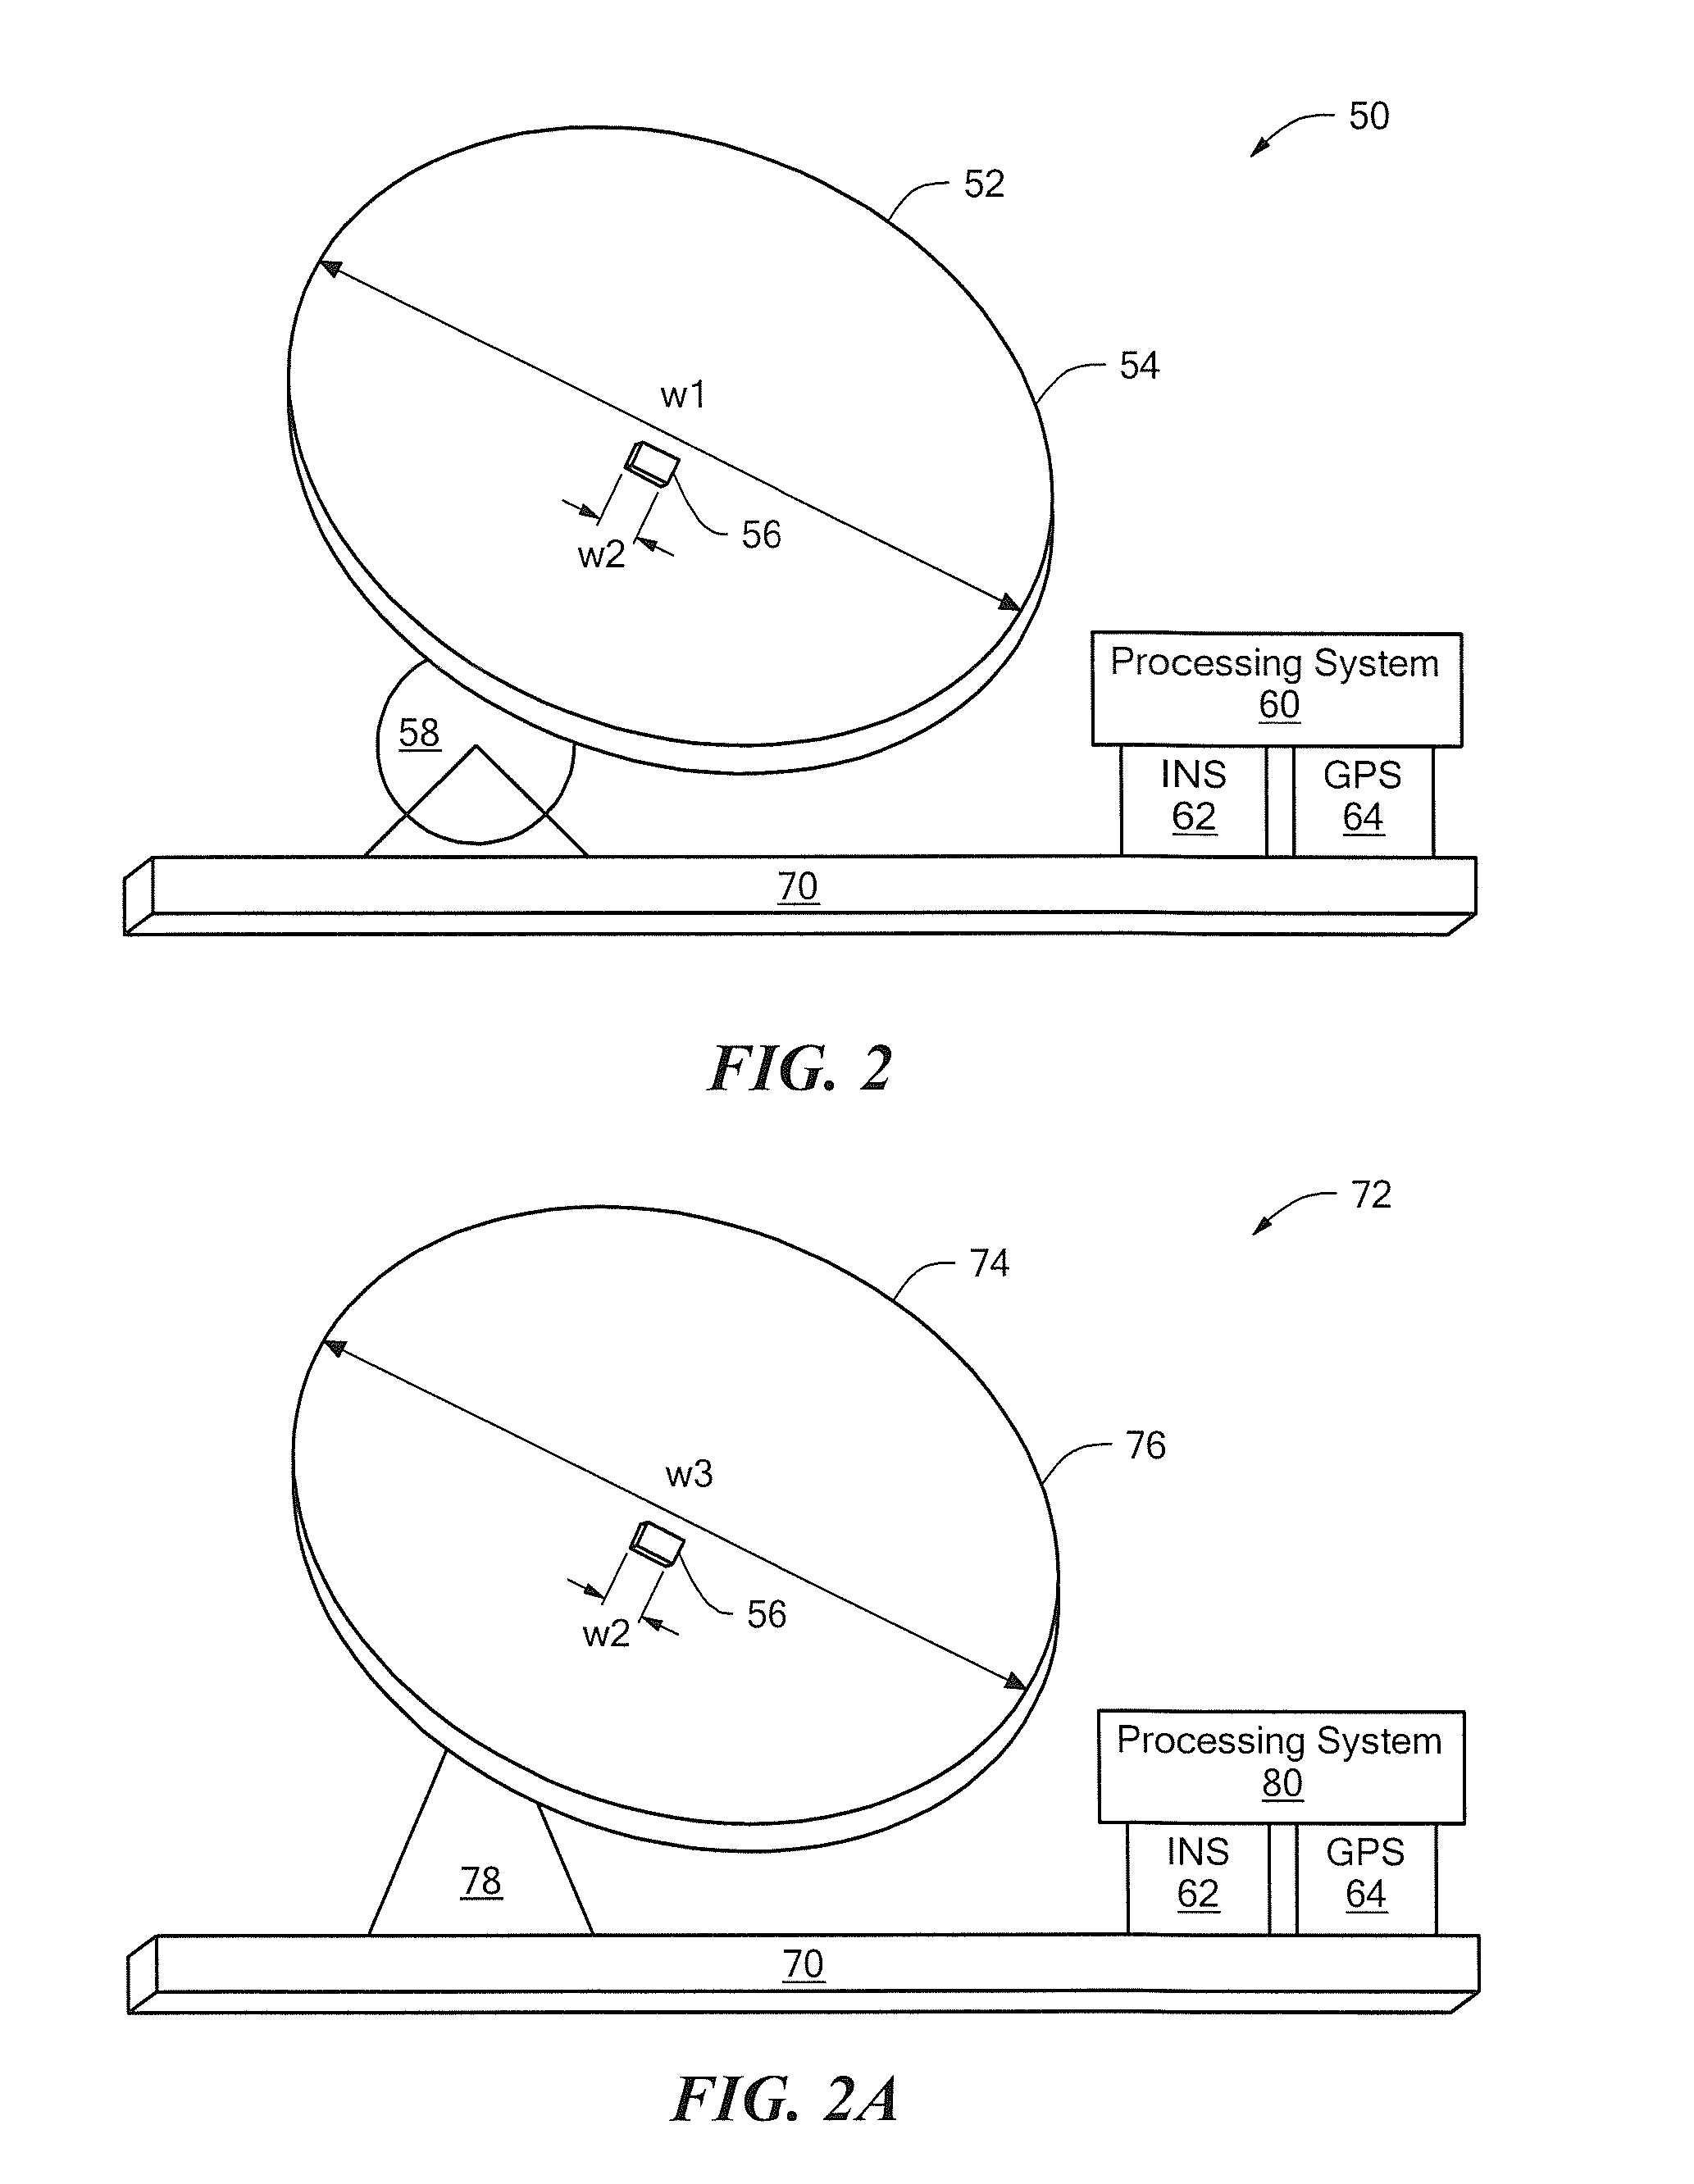 System and Method for Dual-Band Antenna Pointing, Acquisition, And Tracking